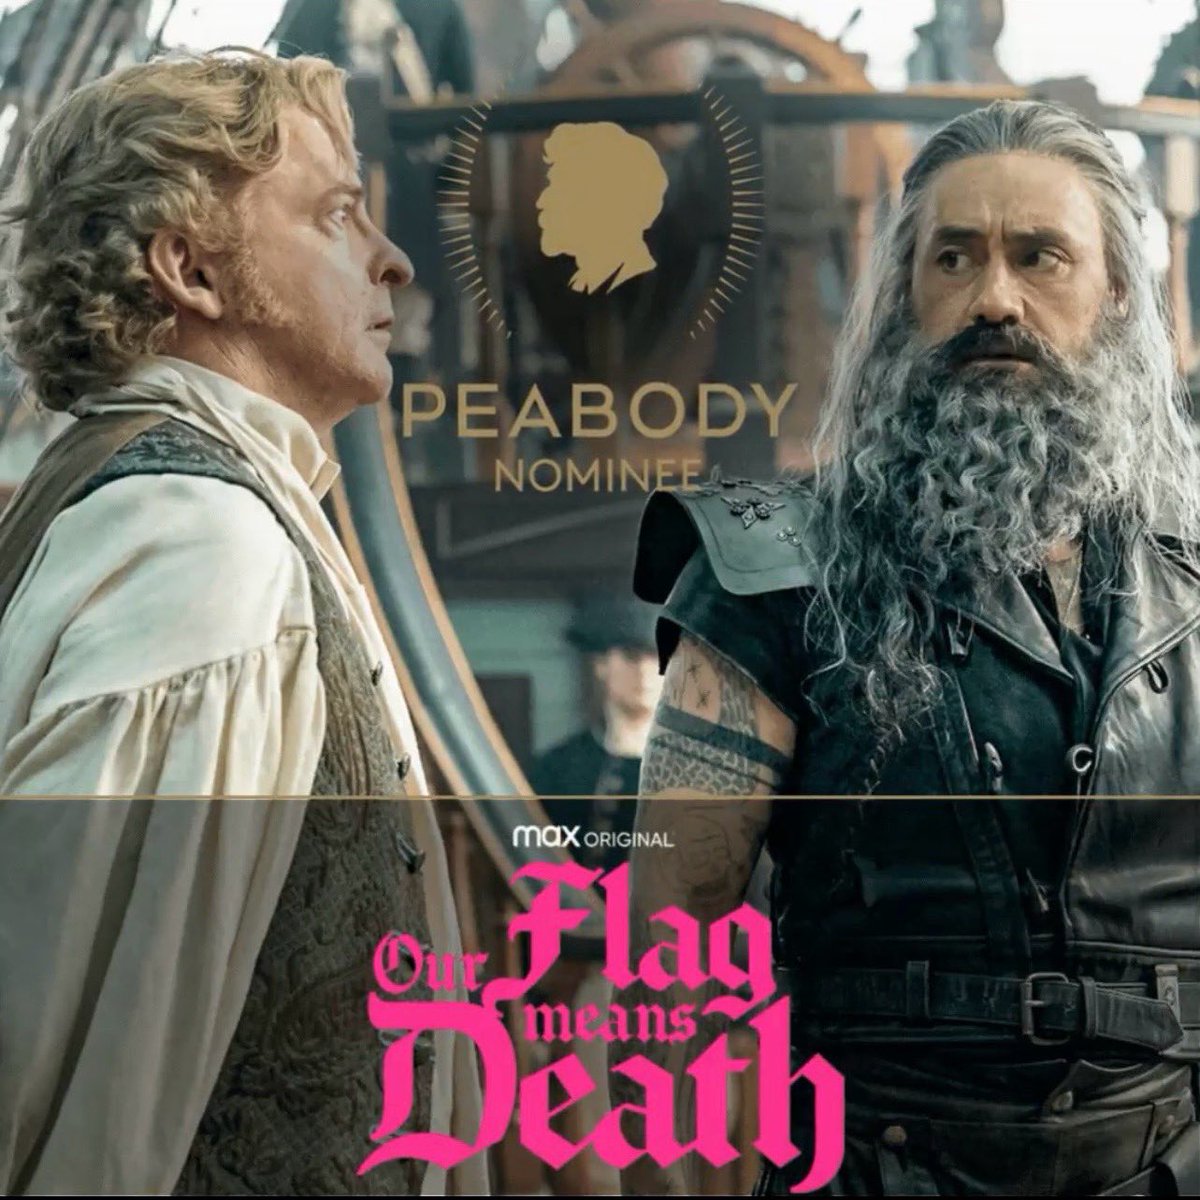 No one will watch new TV shows if they can be canceled despite being a top performer across every measurable parameter! Please help us save Our Flag Means Death! 

Sign/Share the petition:
🏴‍☠️ chng.it/DHdxSdptMK 🏴‍☠️

#saveOFMD #Emmys2024 #75thEmmys